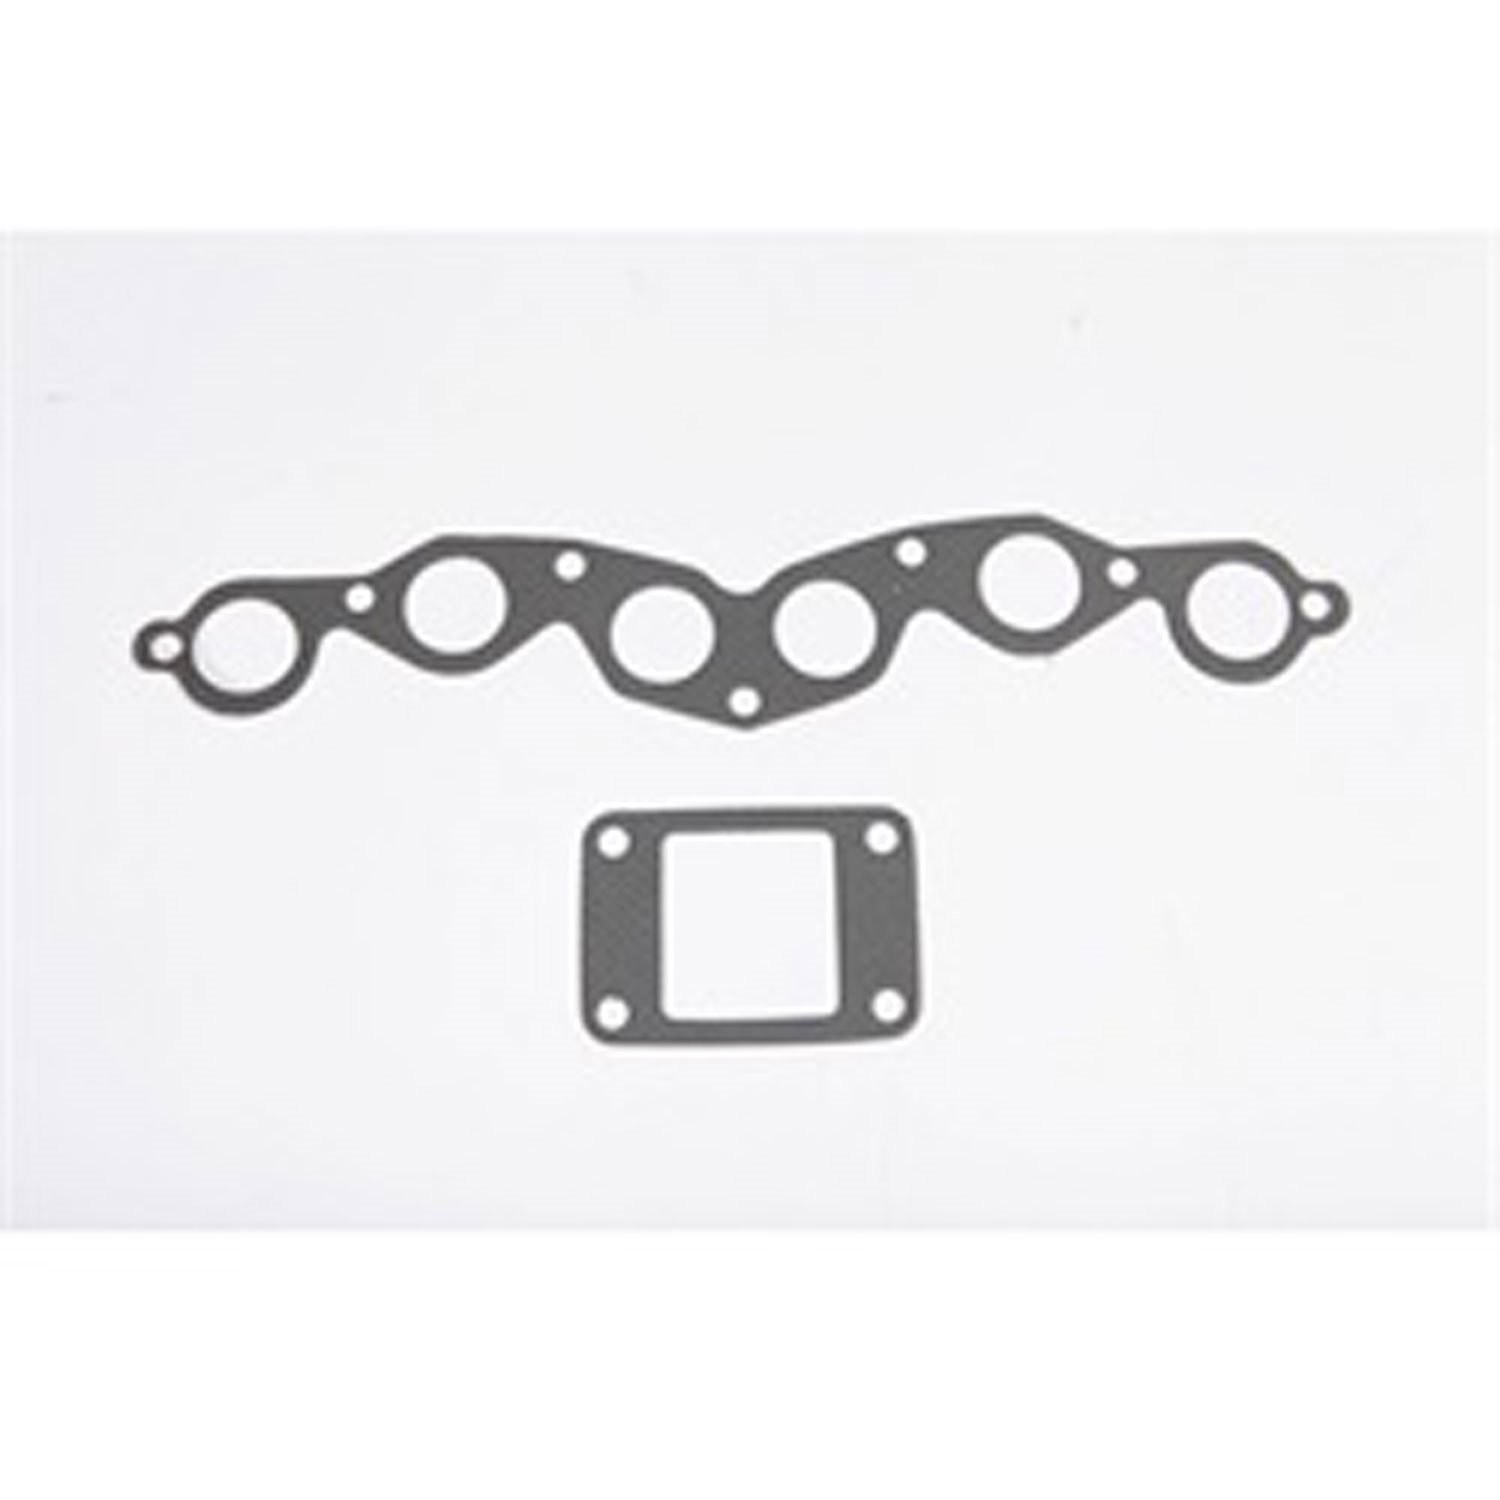 This exhaust manifold gasket kit from Omix-ADA fits 41-53 Ford and Willys models with the 134 cubic inch L-head engine.